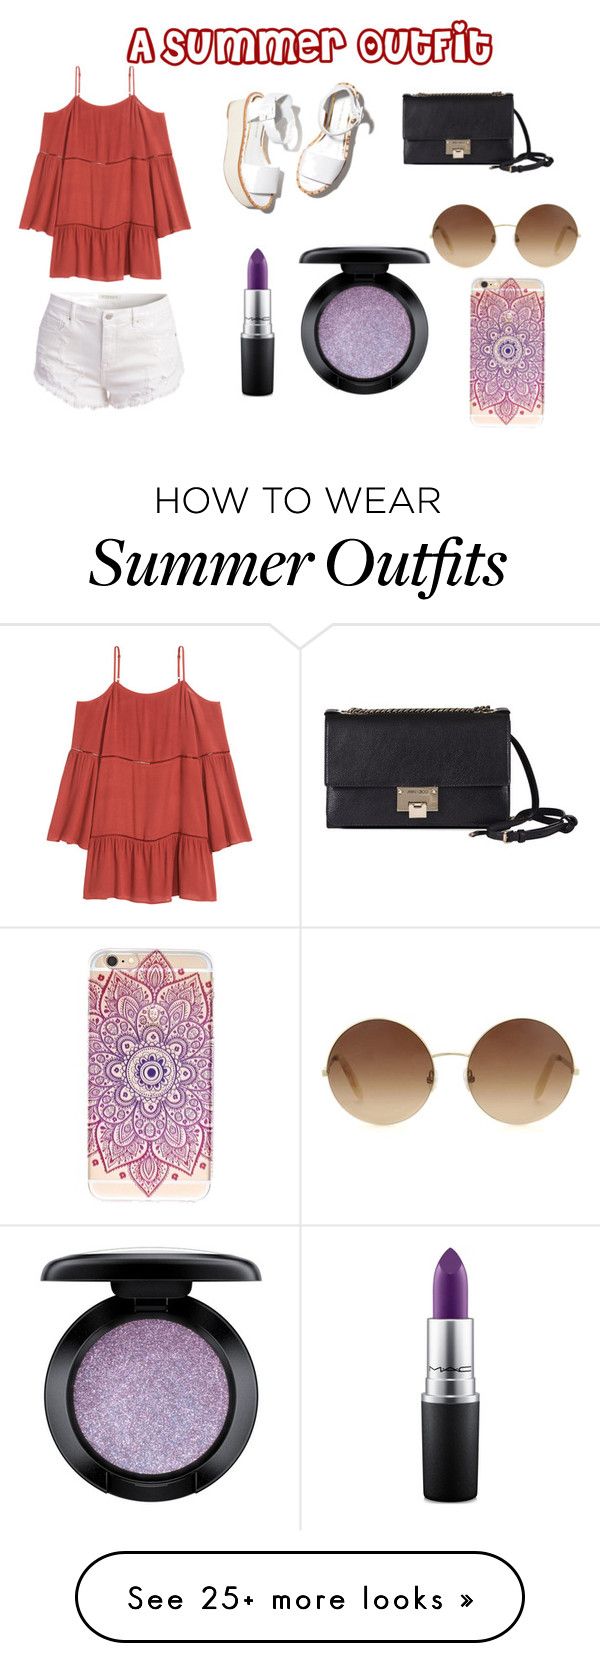 "Outfit 2 - A Summer OutFit" by poohyummz2 on Polyvore featuring Palom...